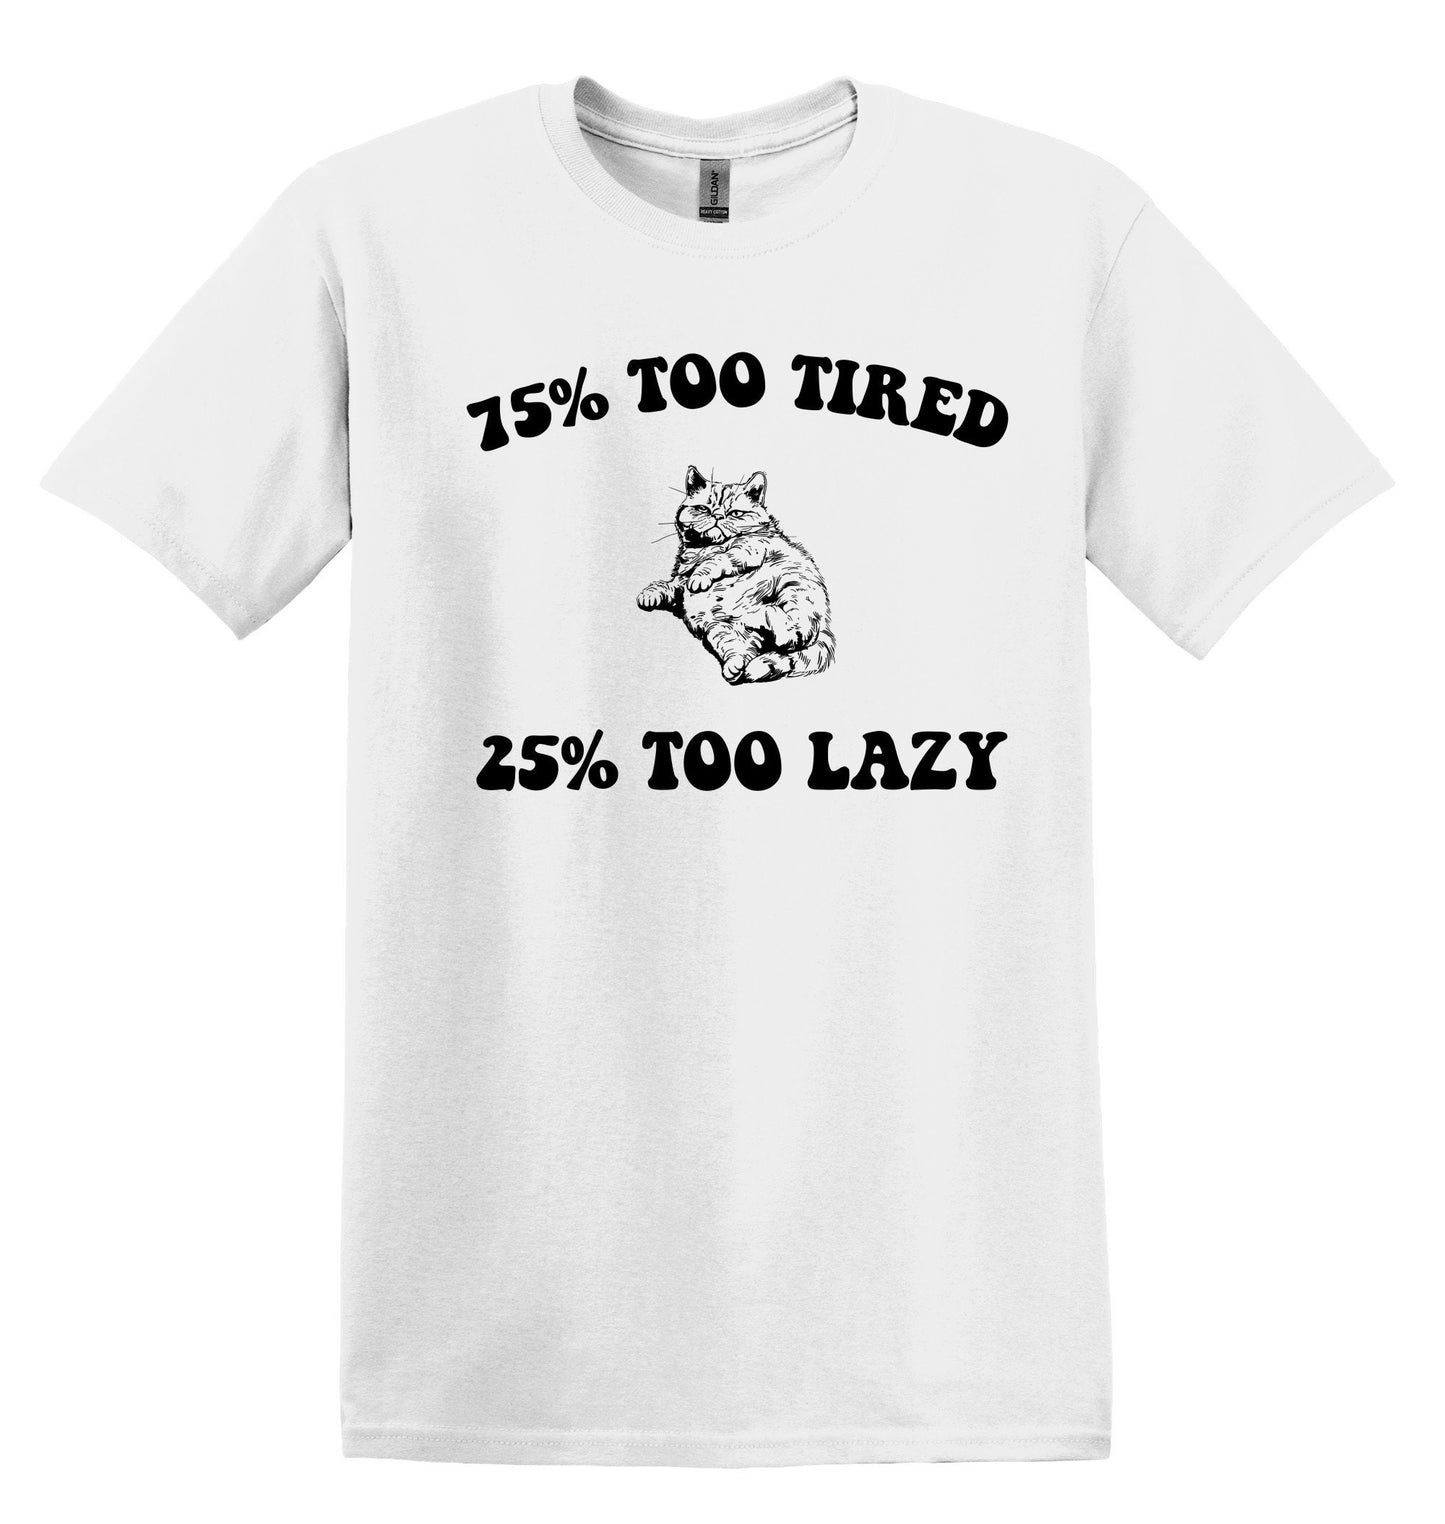 75% Too Tired 25 Too Lazy Cat T-Shirt – Vintage Graphic Shirt for Relaxing Days – Adult Tee